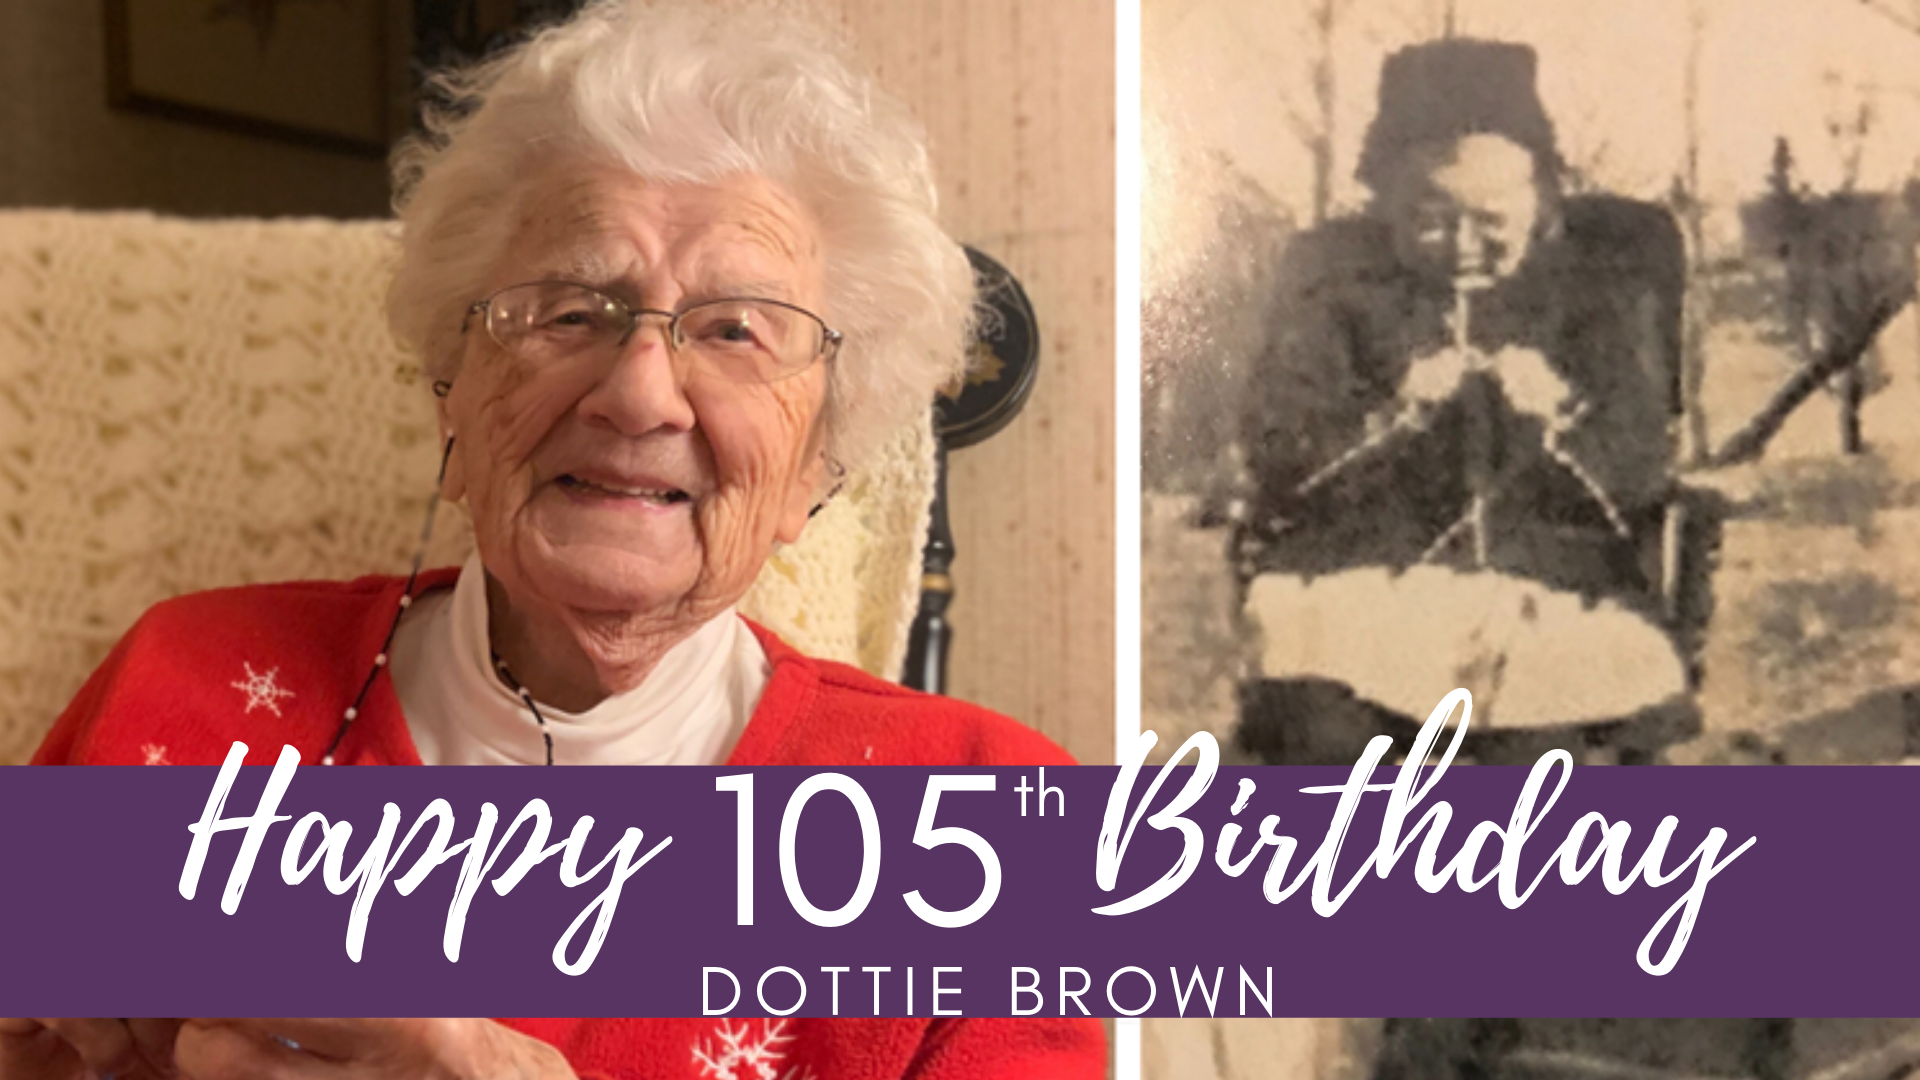 Dottie Brown of Lewiston, Maine has been knitting for more than 100 years.  She still lives in her own home, the same one where she raised her family.